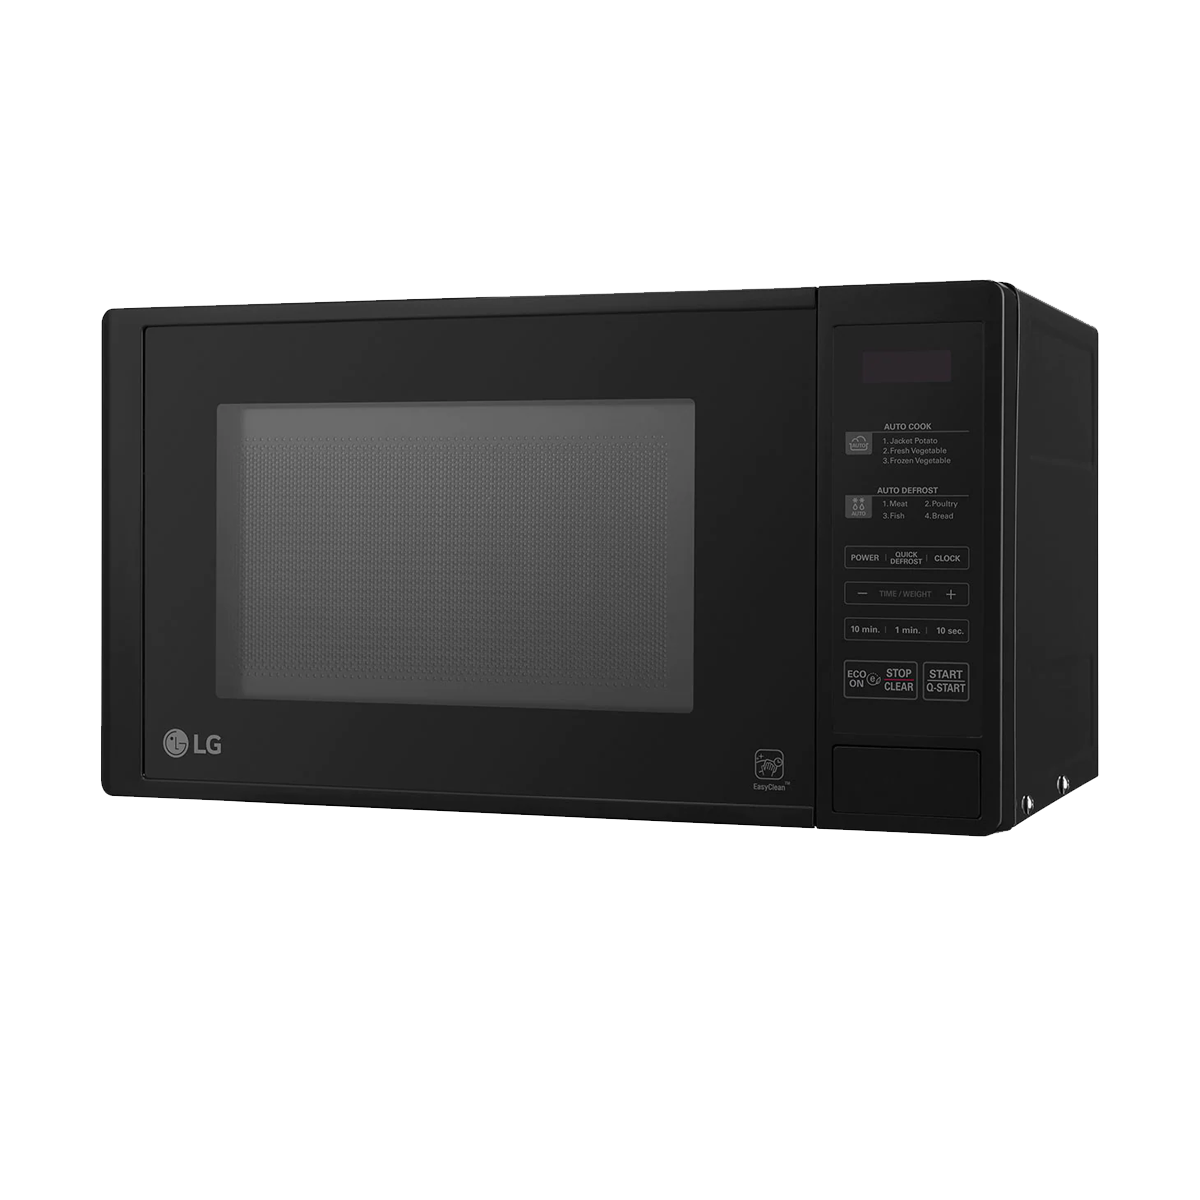 LG 20L Solo Microwave Oven